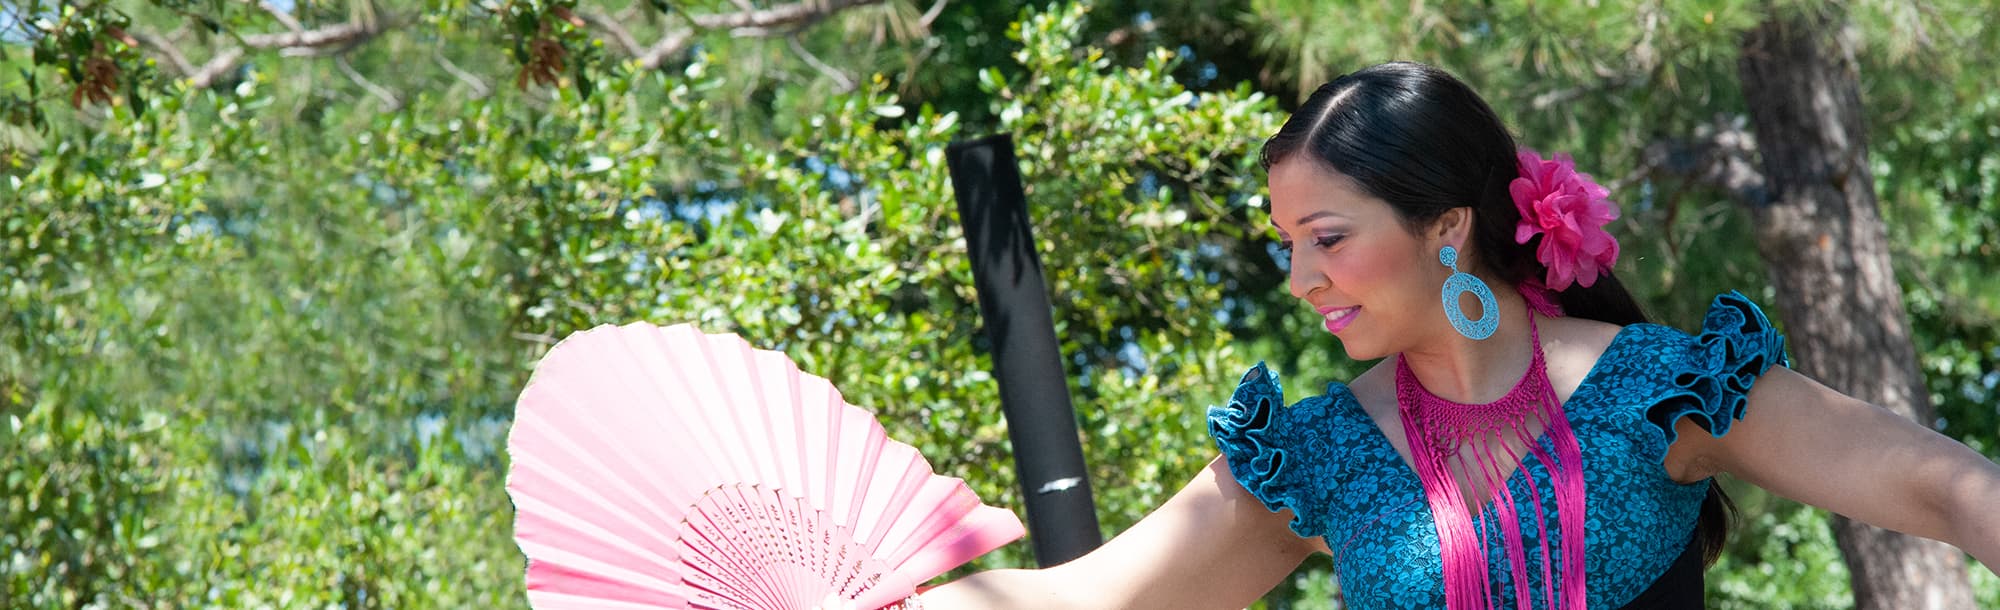 A woman dressed in traditional Mexican garb dancing with a pink fan